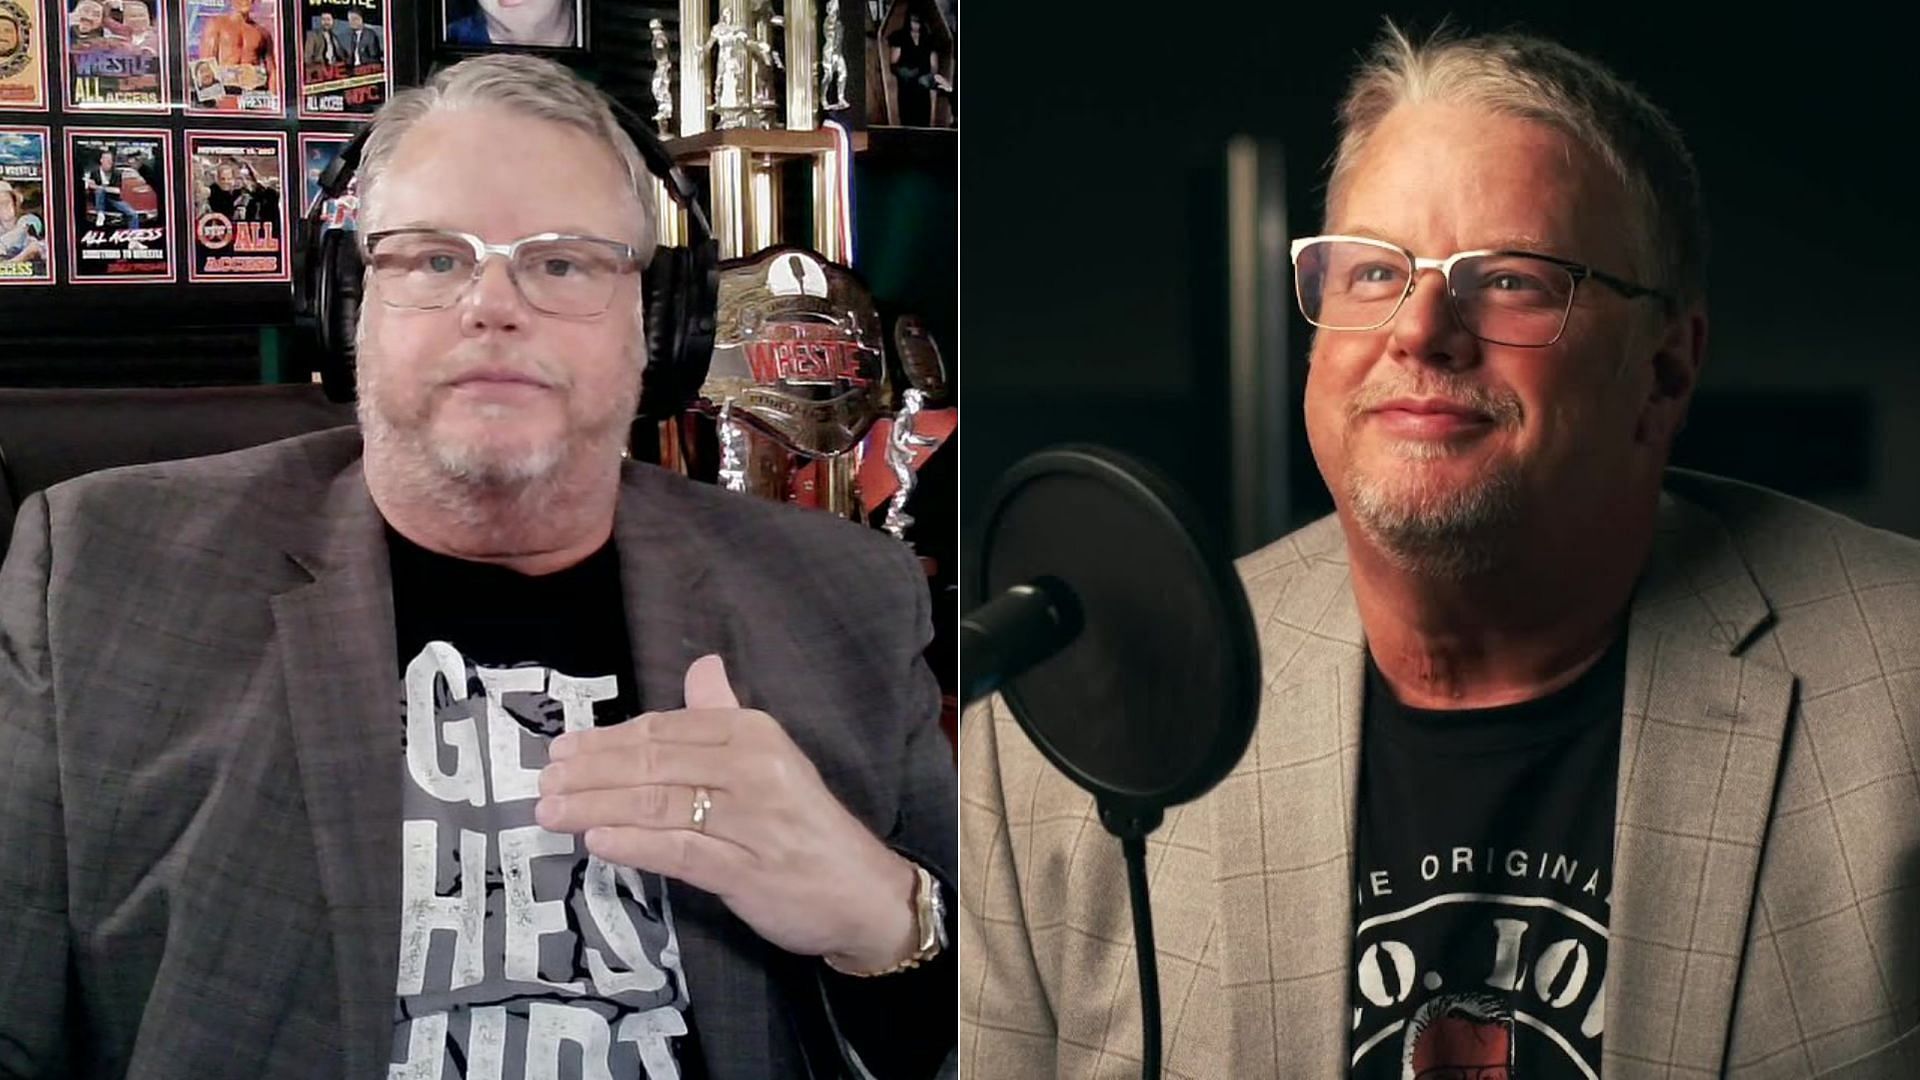 Bruce Prichard recently made some interesting comments about a former superstar.